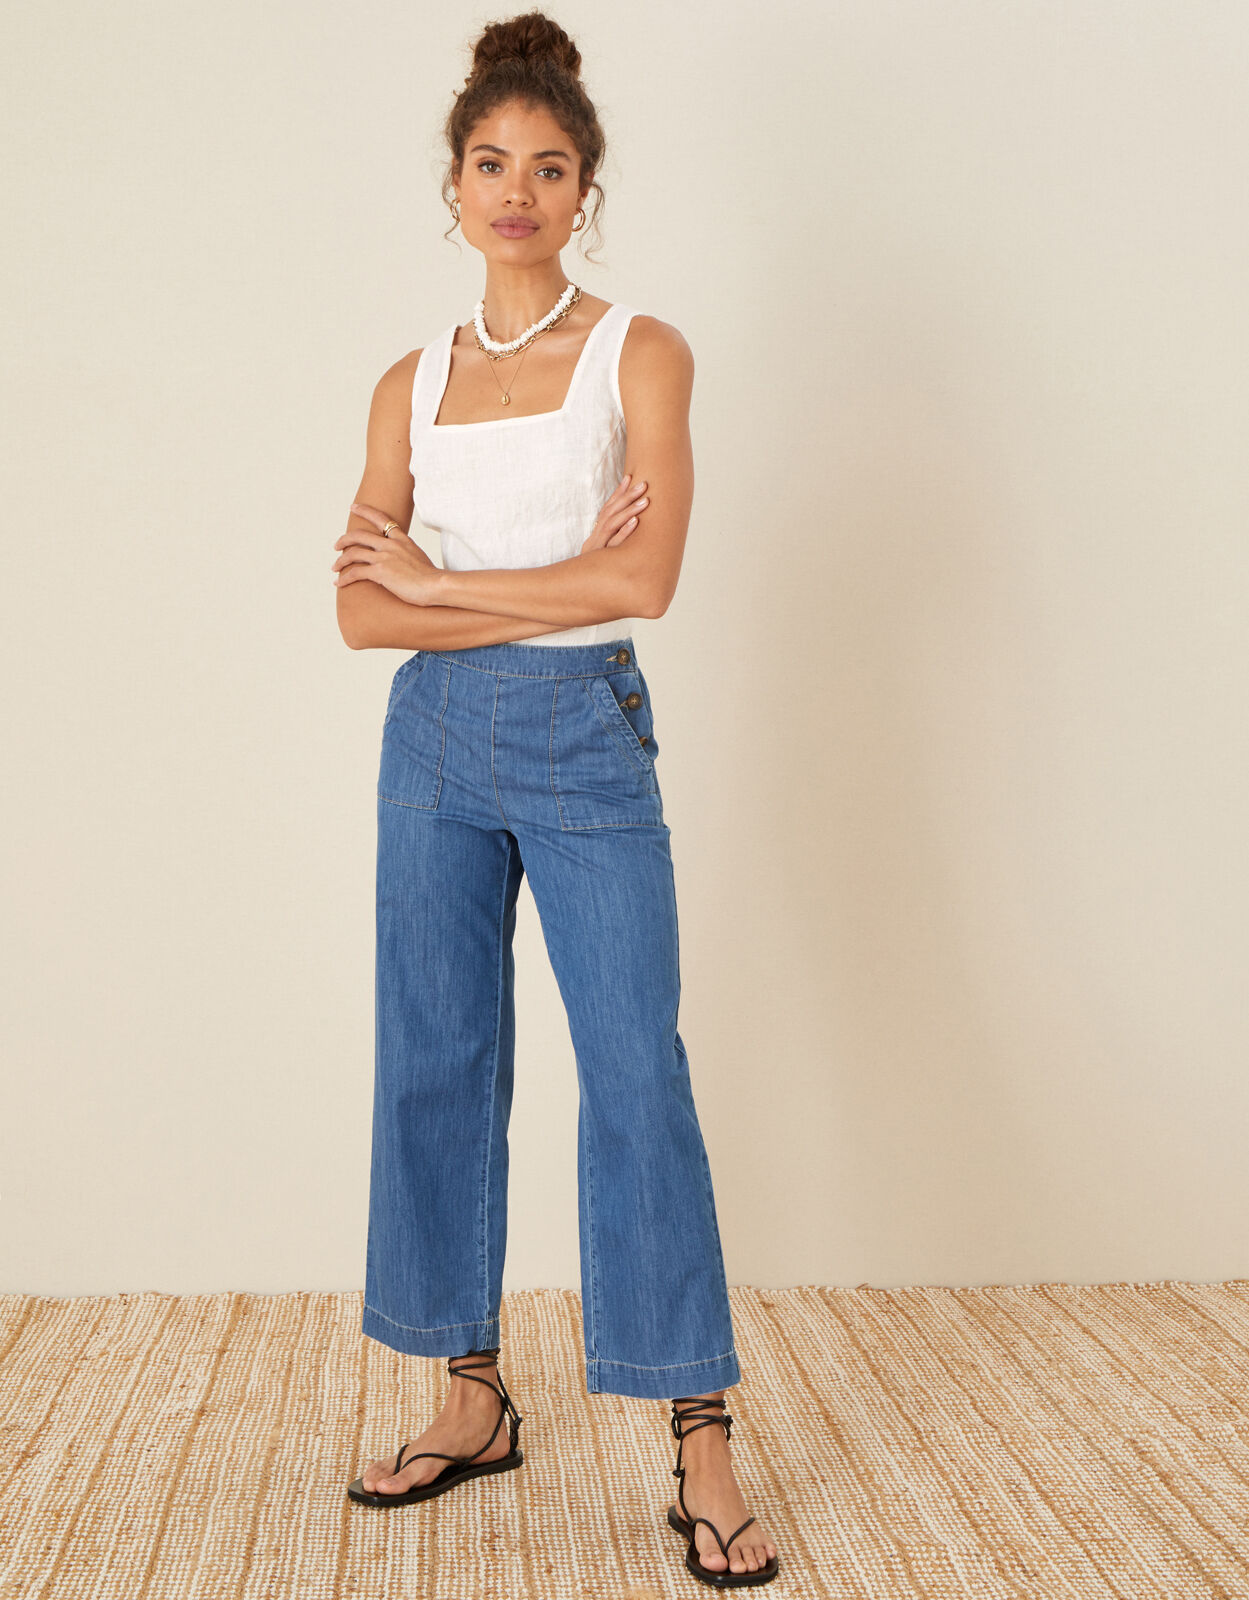 15 Outfits With Distressed Denim Culottes - Styleoholic